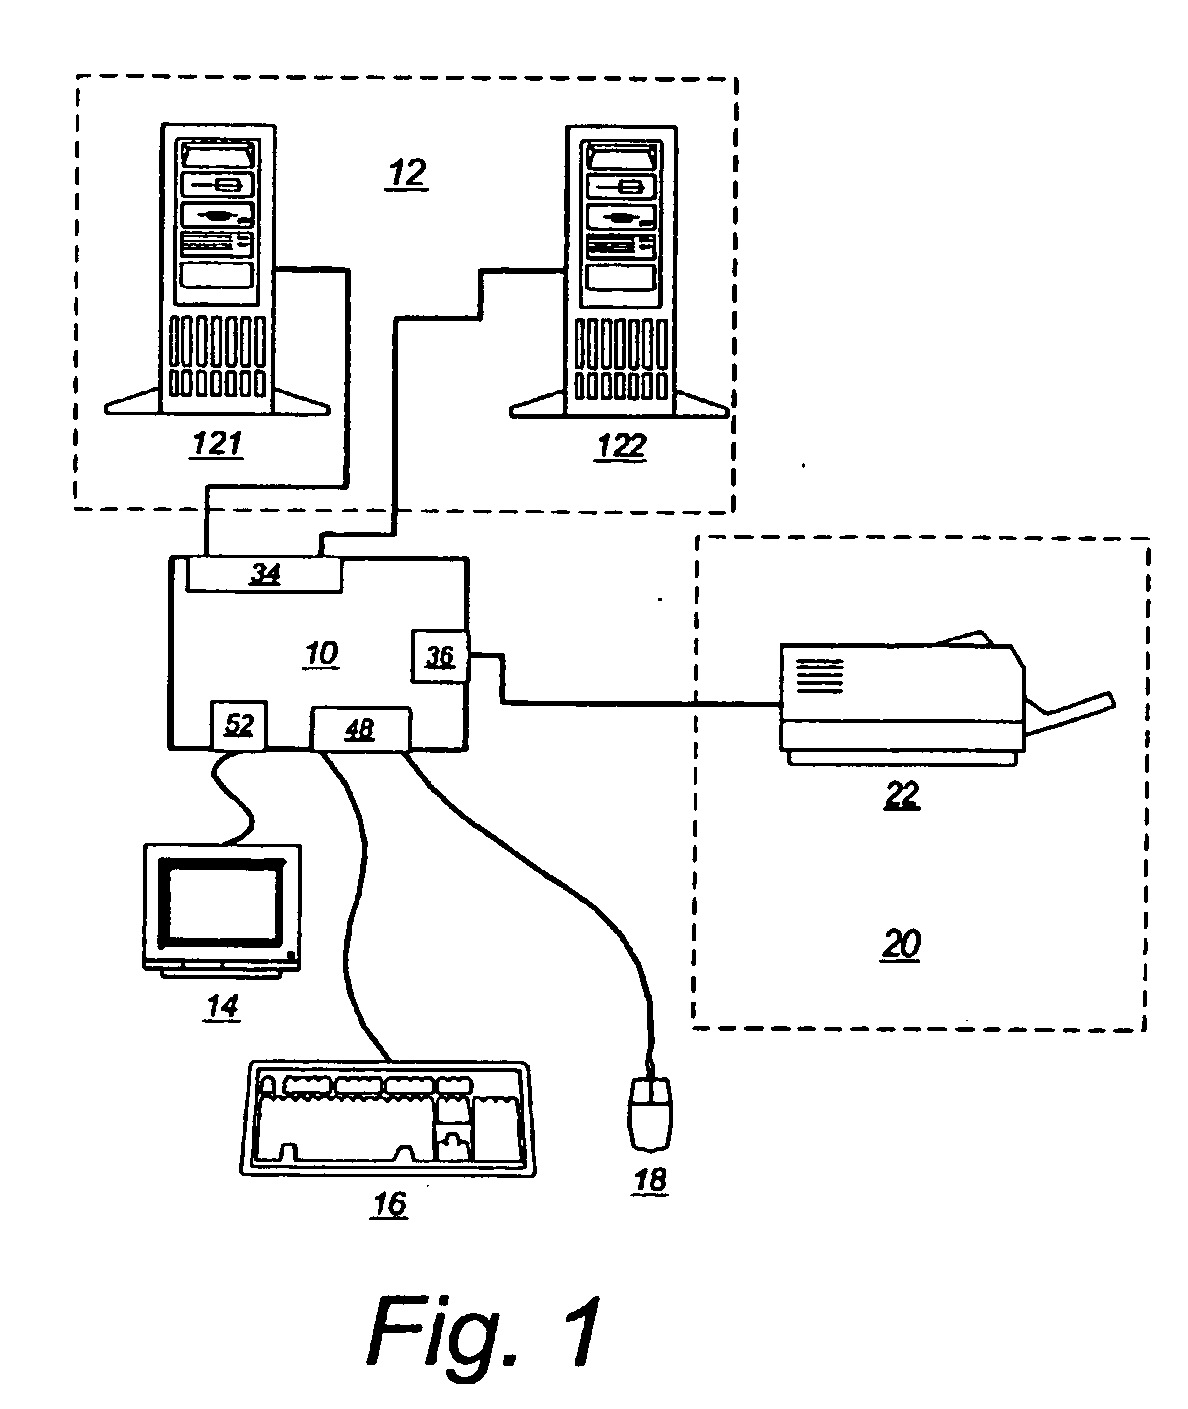 Asynchronous/synchronous KVMP switch for console and peripheral devices